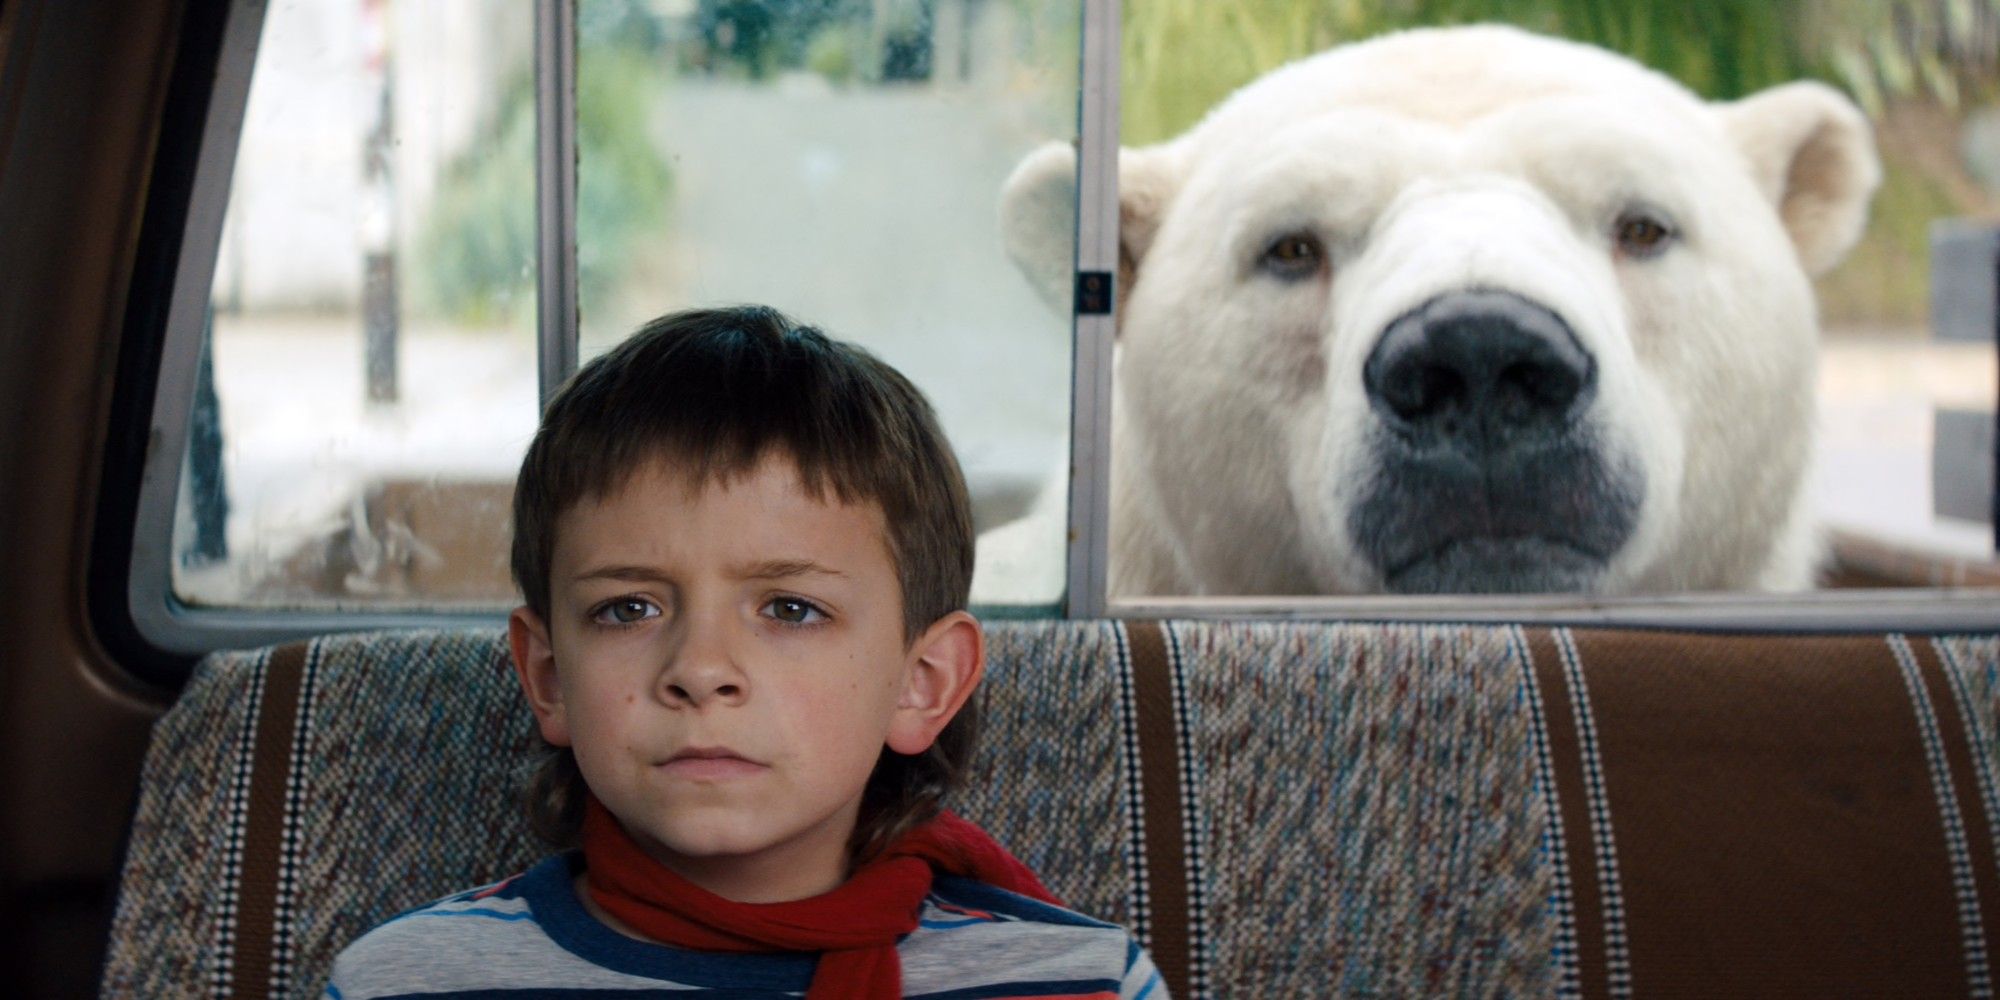 Winslow Fegley sitting on a bus seat with a polar bear in Timmy Failure